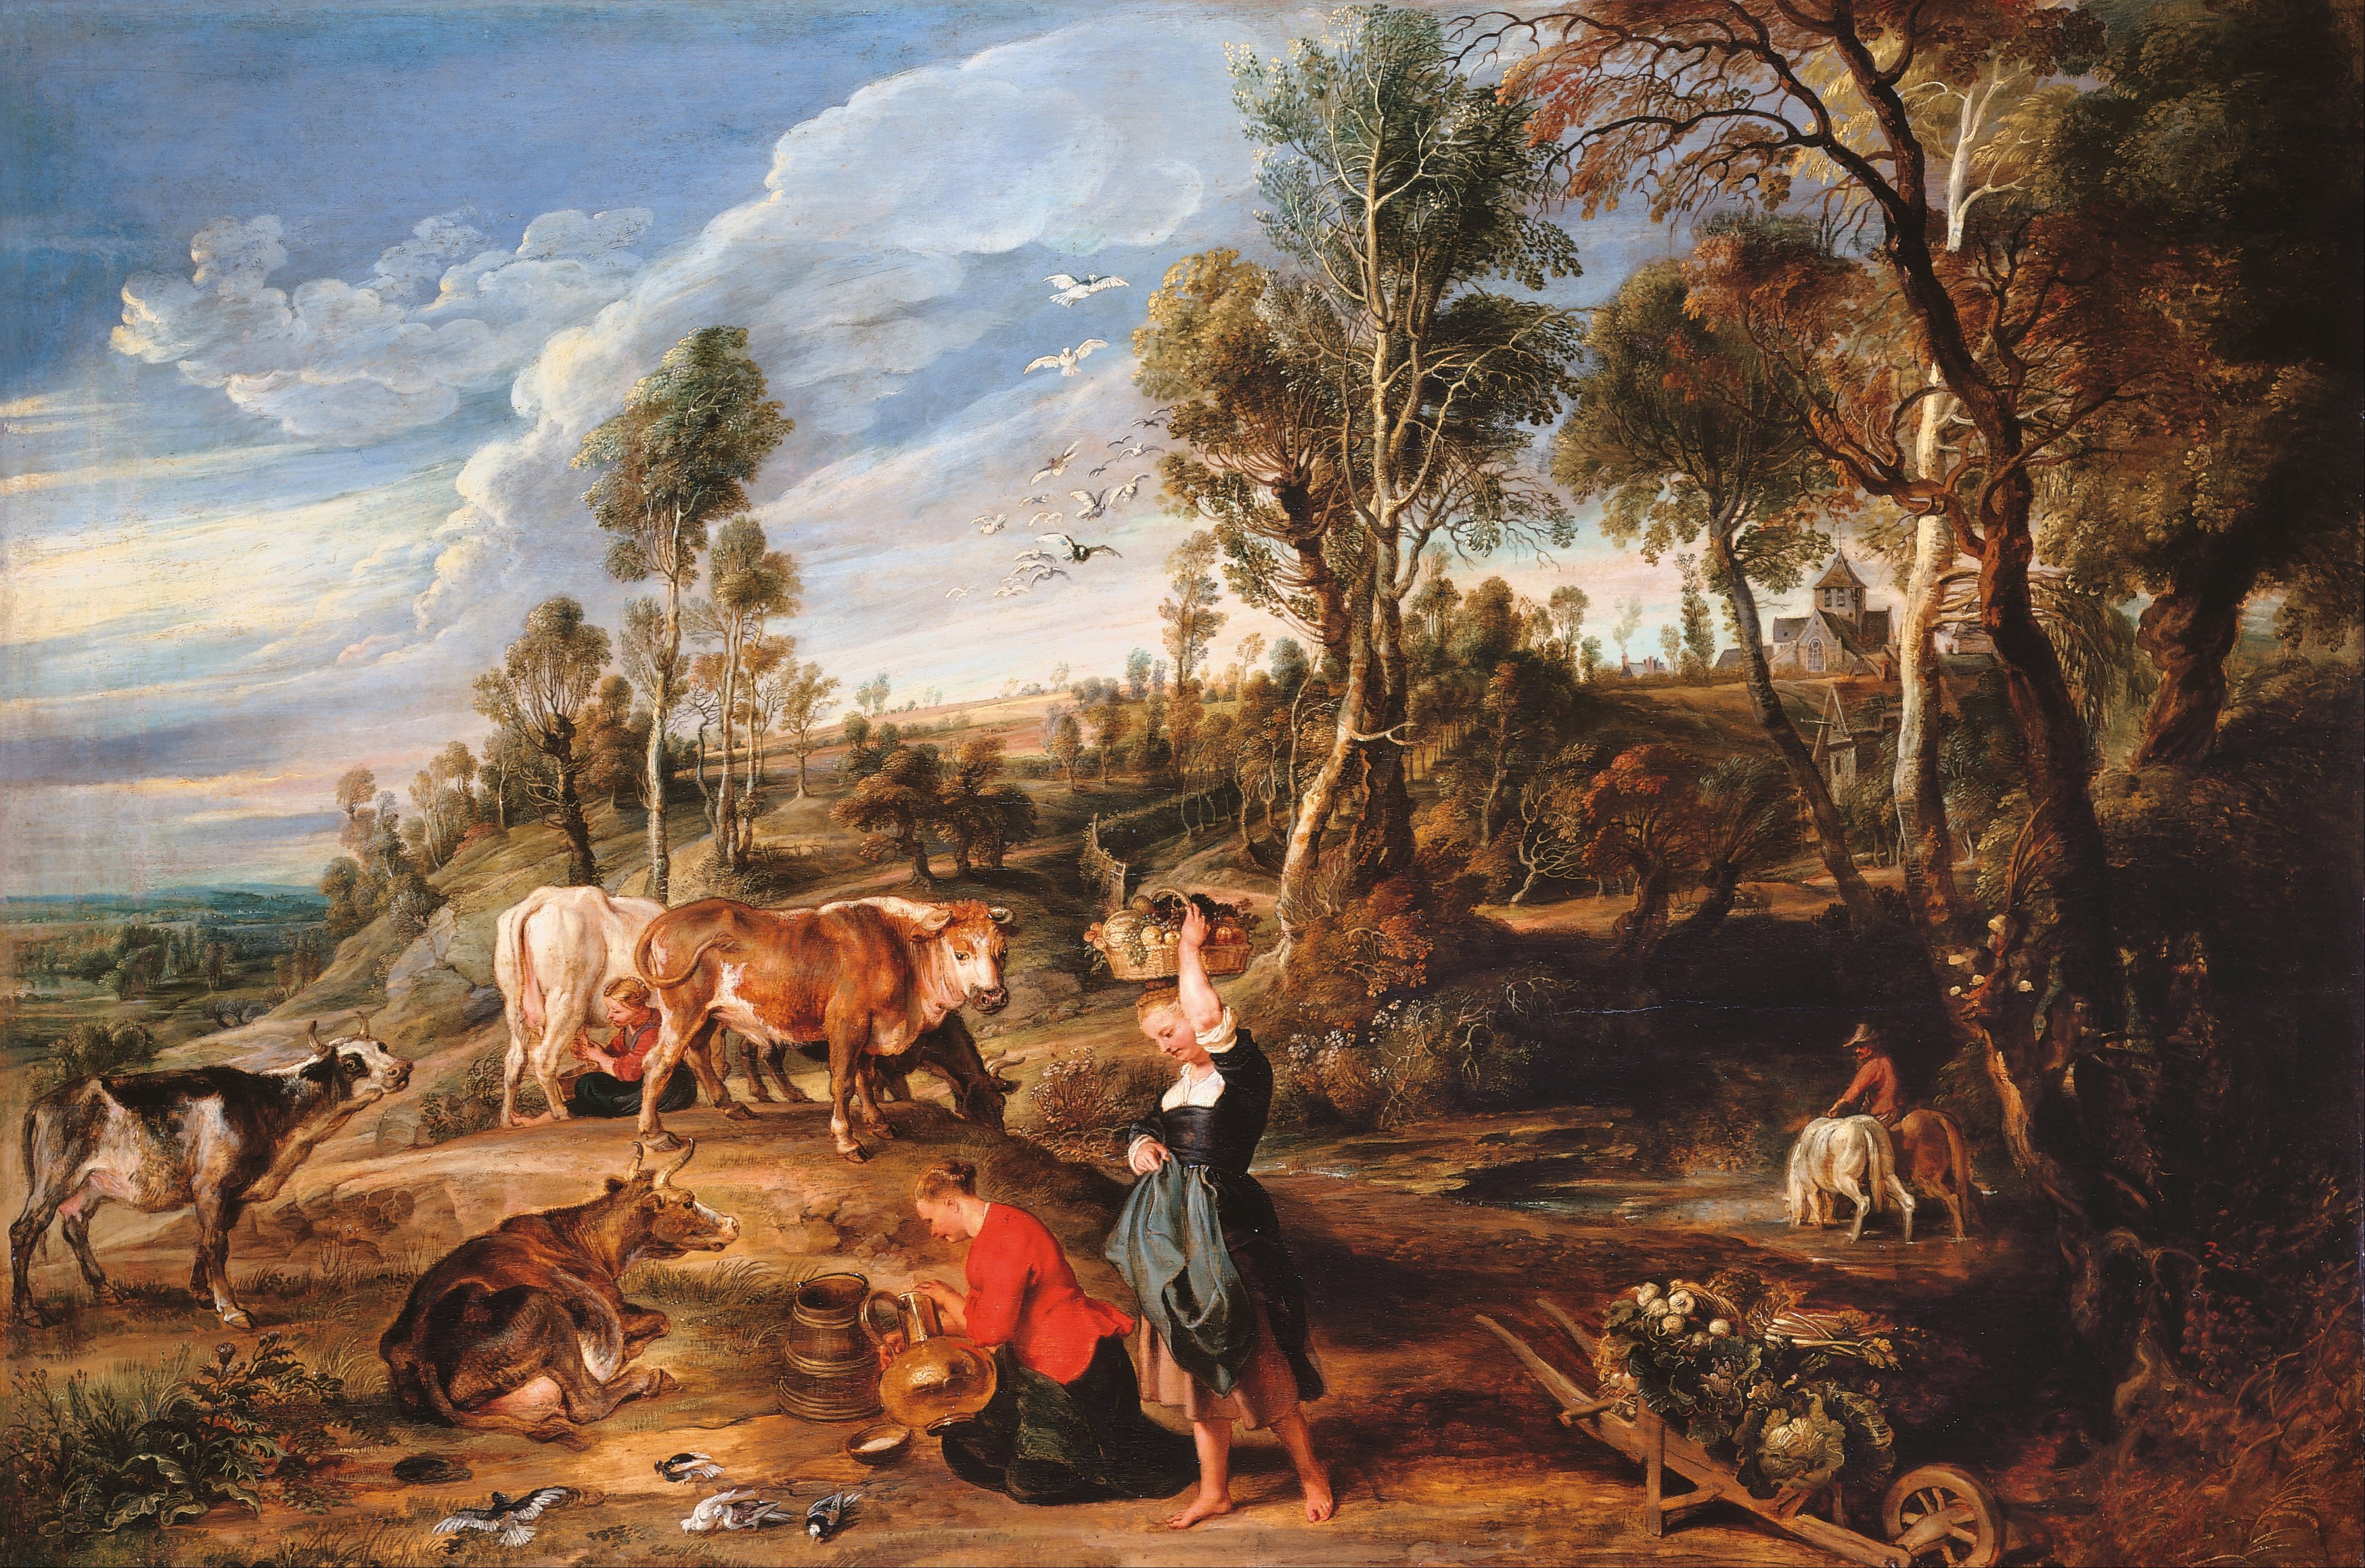 Sir Peter Paul Rubens - Milkmaids with Cattle in a Landscape, 'The Farm at Laken' - Google Art Project